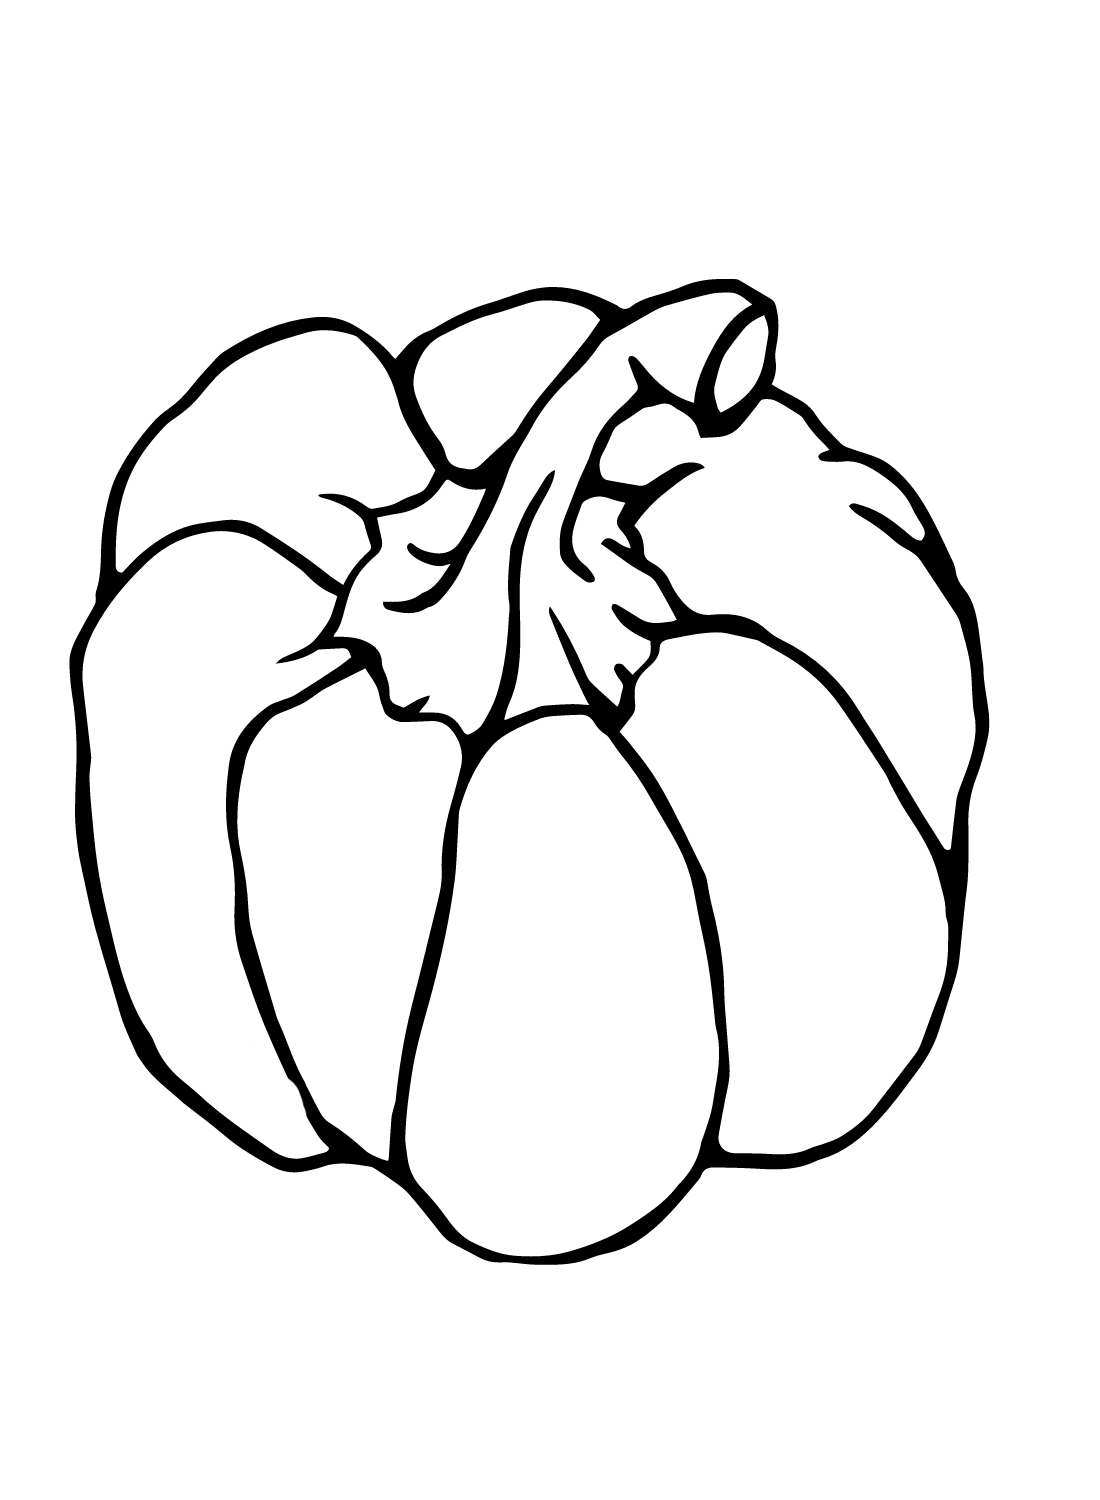 Bell pepper coloring pages printable for free download